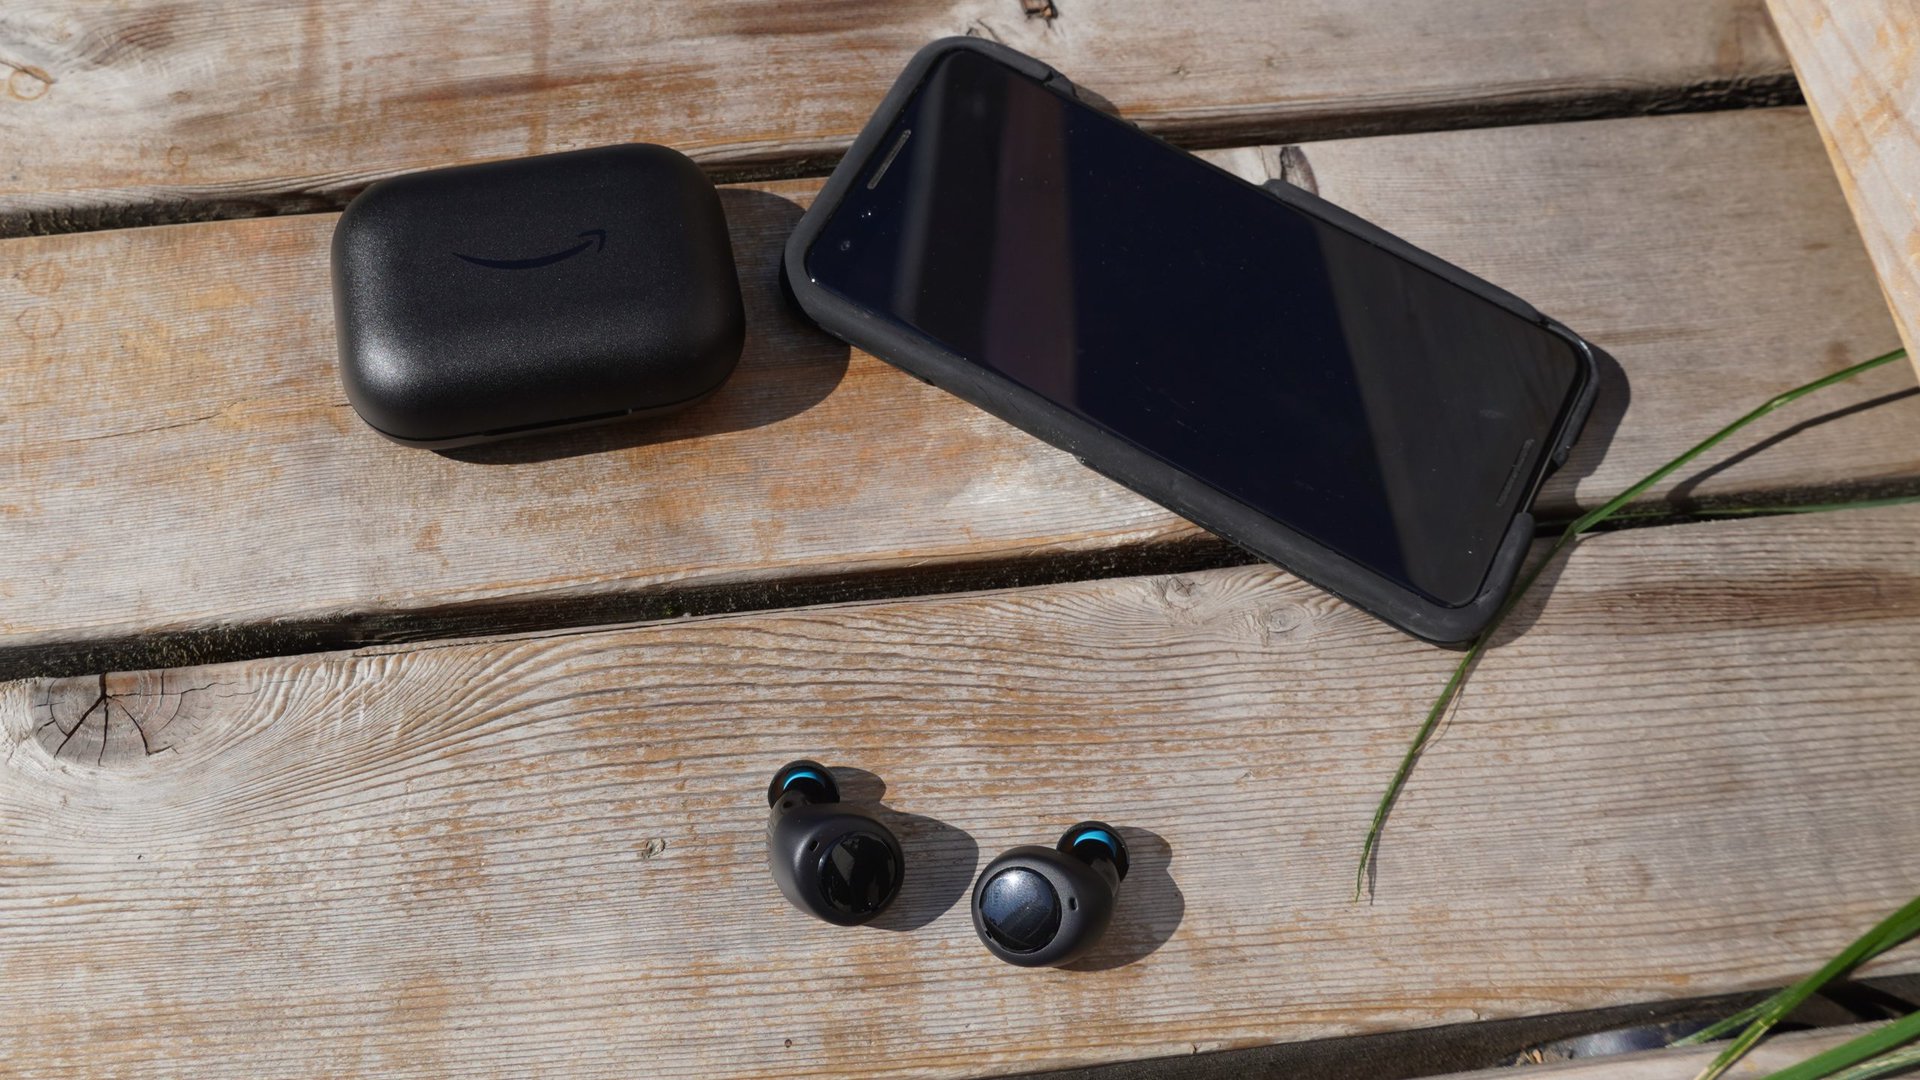 A pair of Amazon Echo Buds (2nd Gen) sitting in front of a phone to their right and their case to their left on a wood surface outdoors.